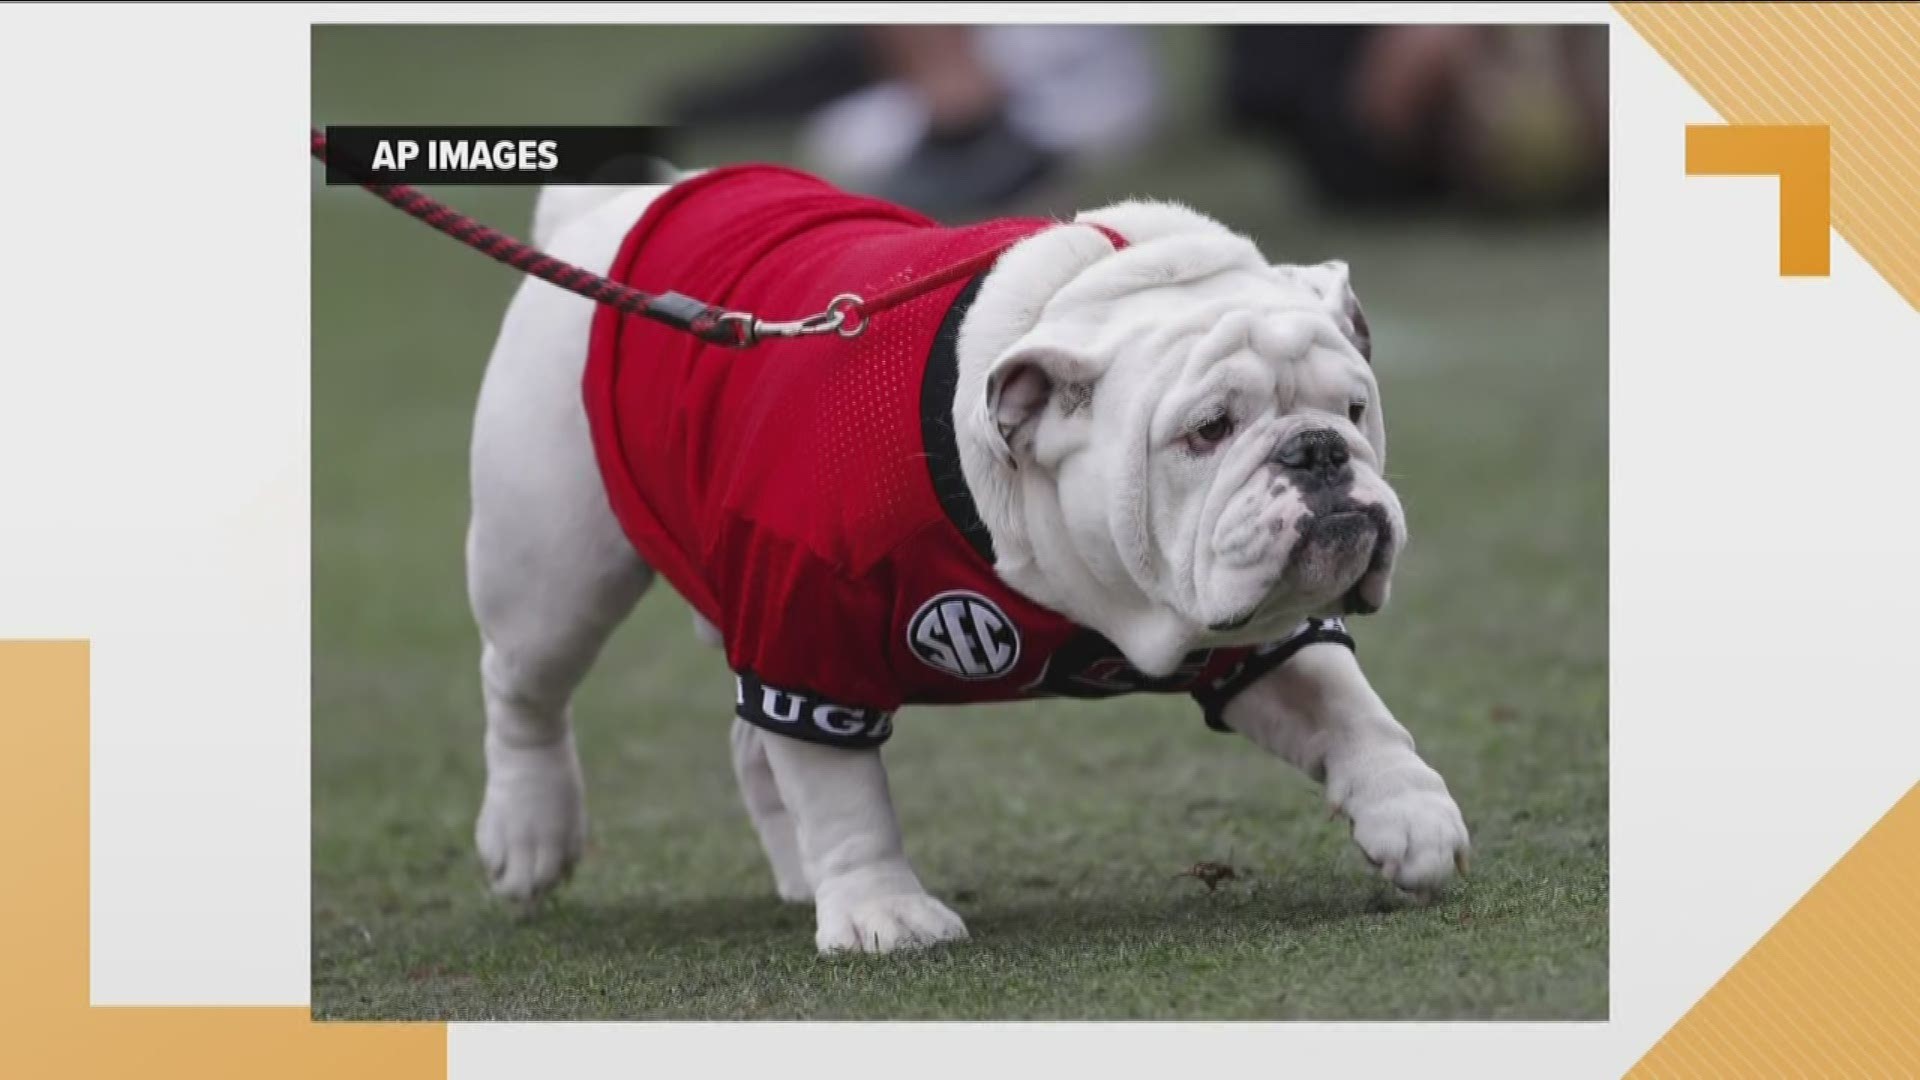 Sports Illustrated put together a list of their 10 best college football mascots, and none other than Uga topped it.